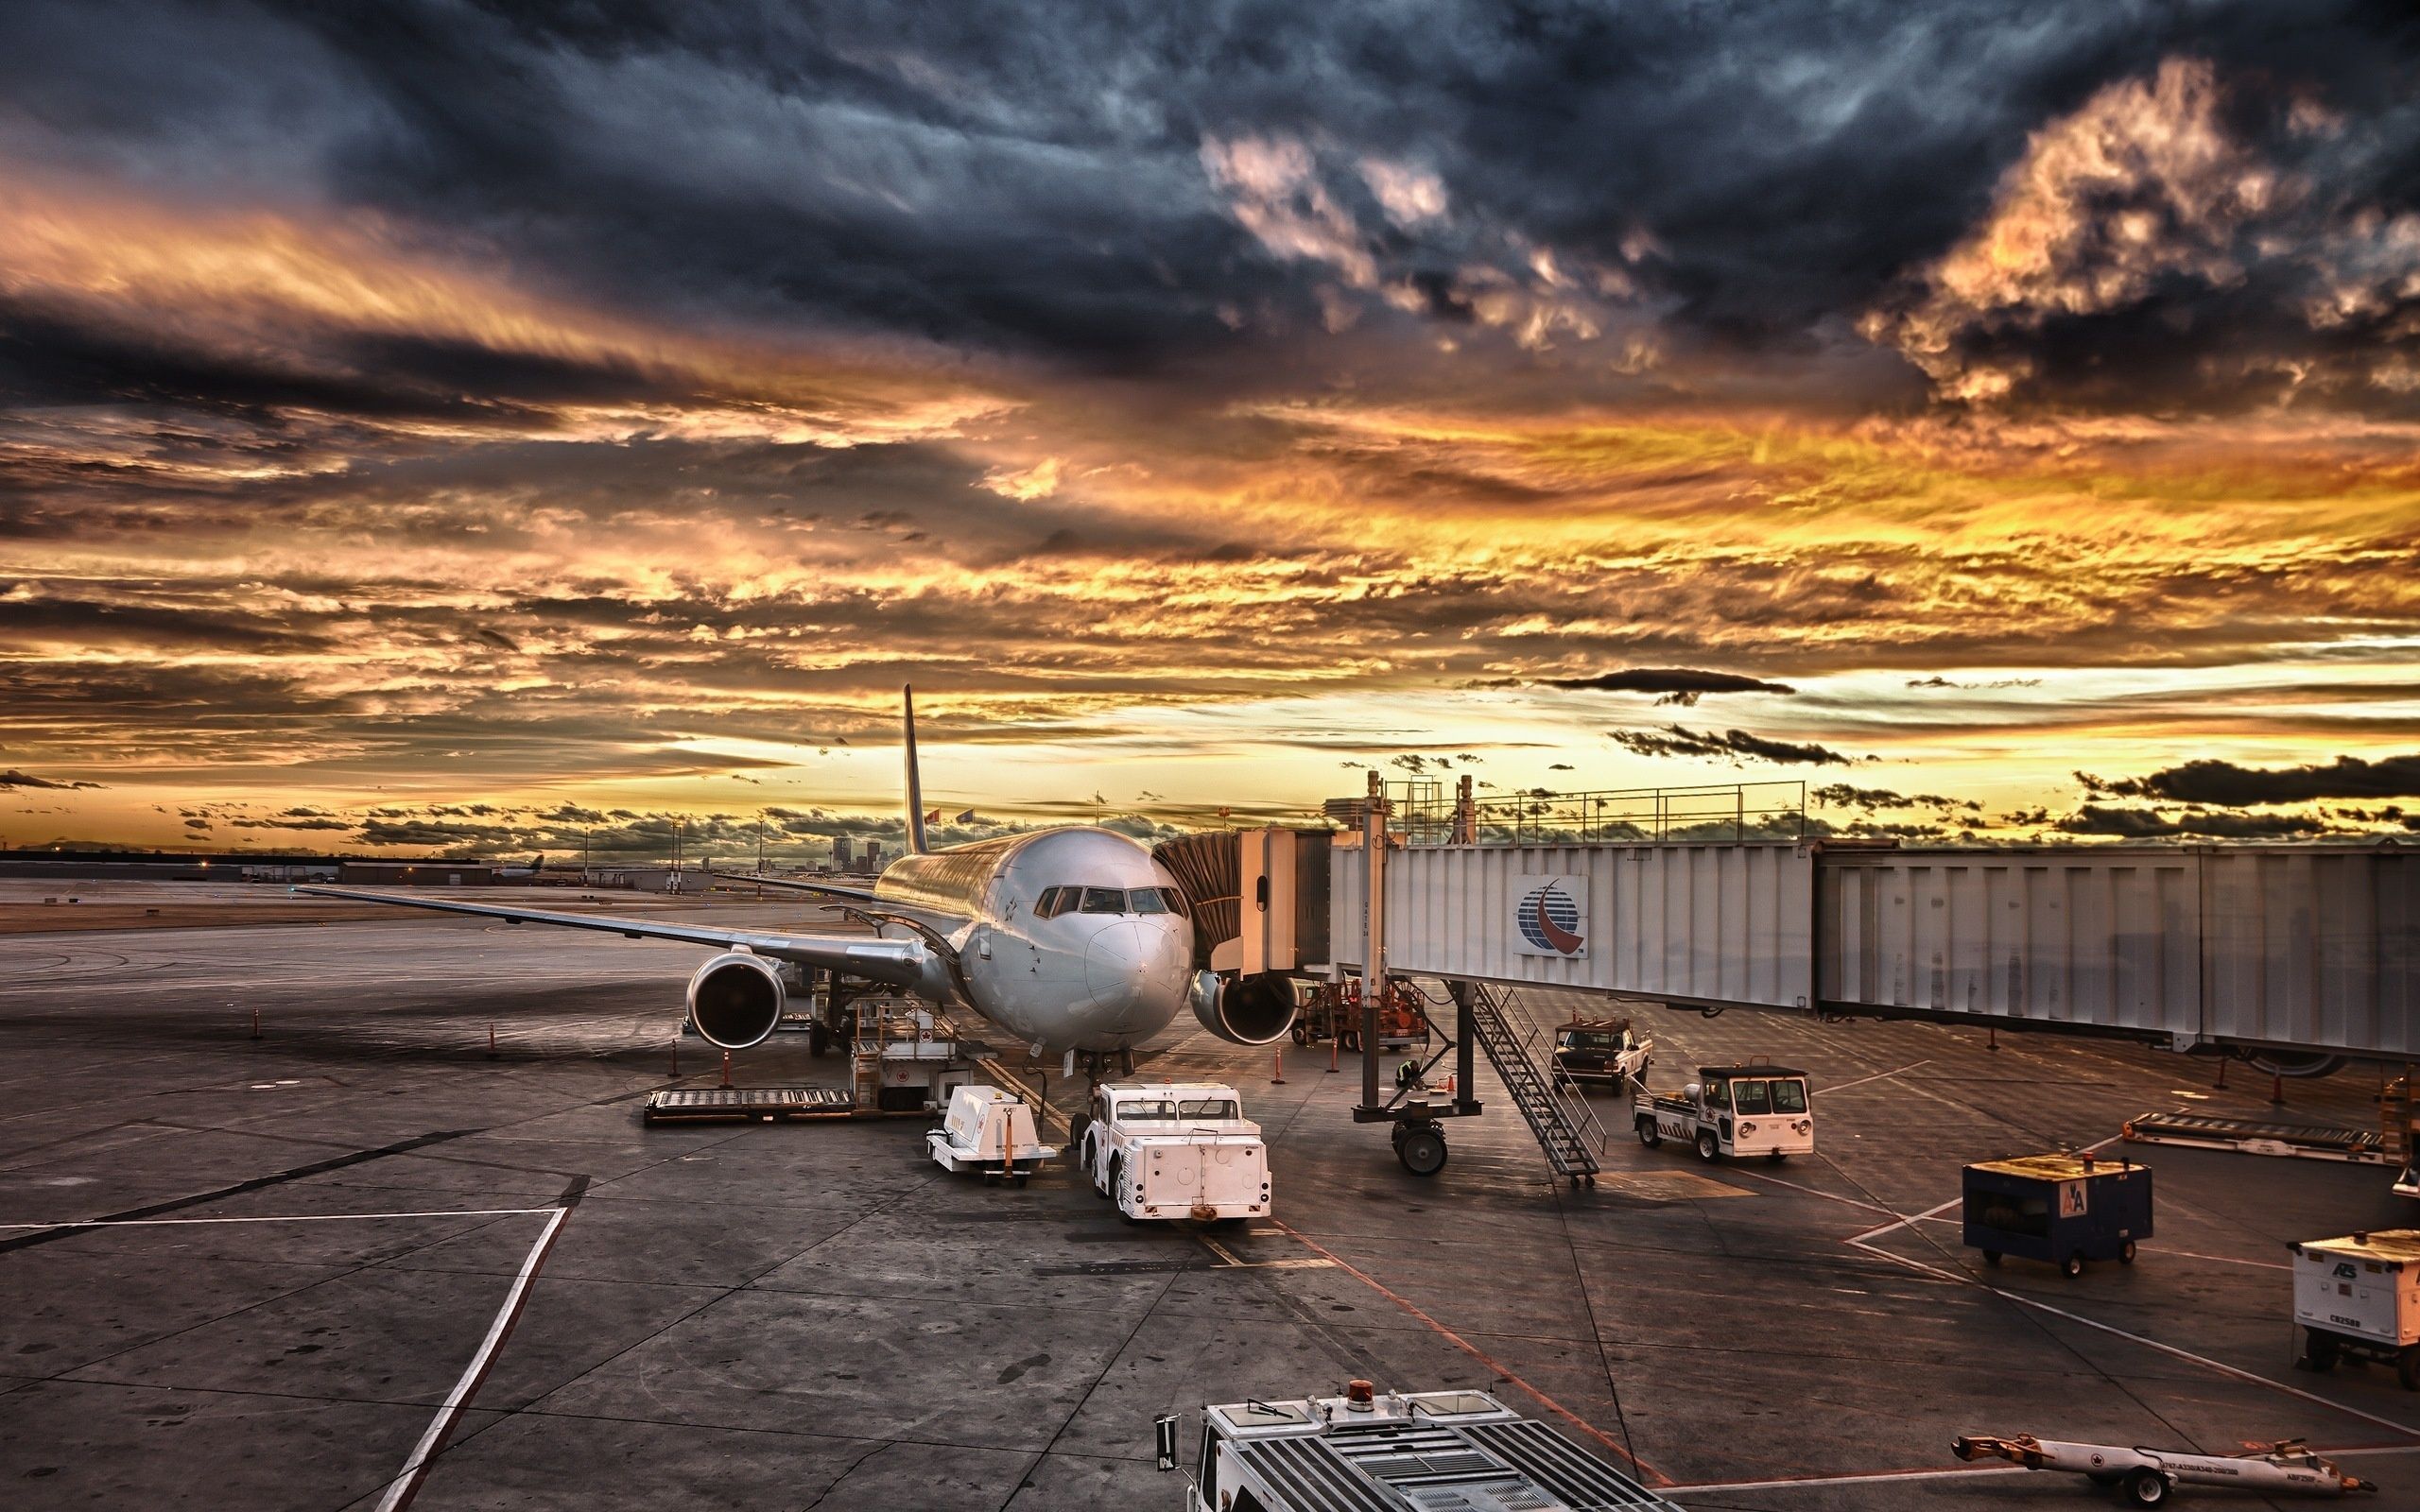 Plane, Airport, Aviation | wallpapers is